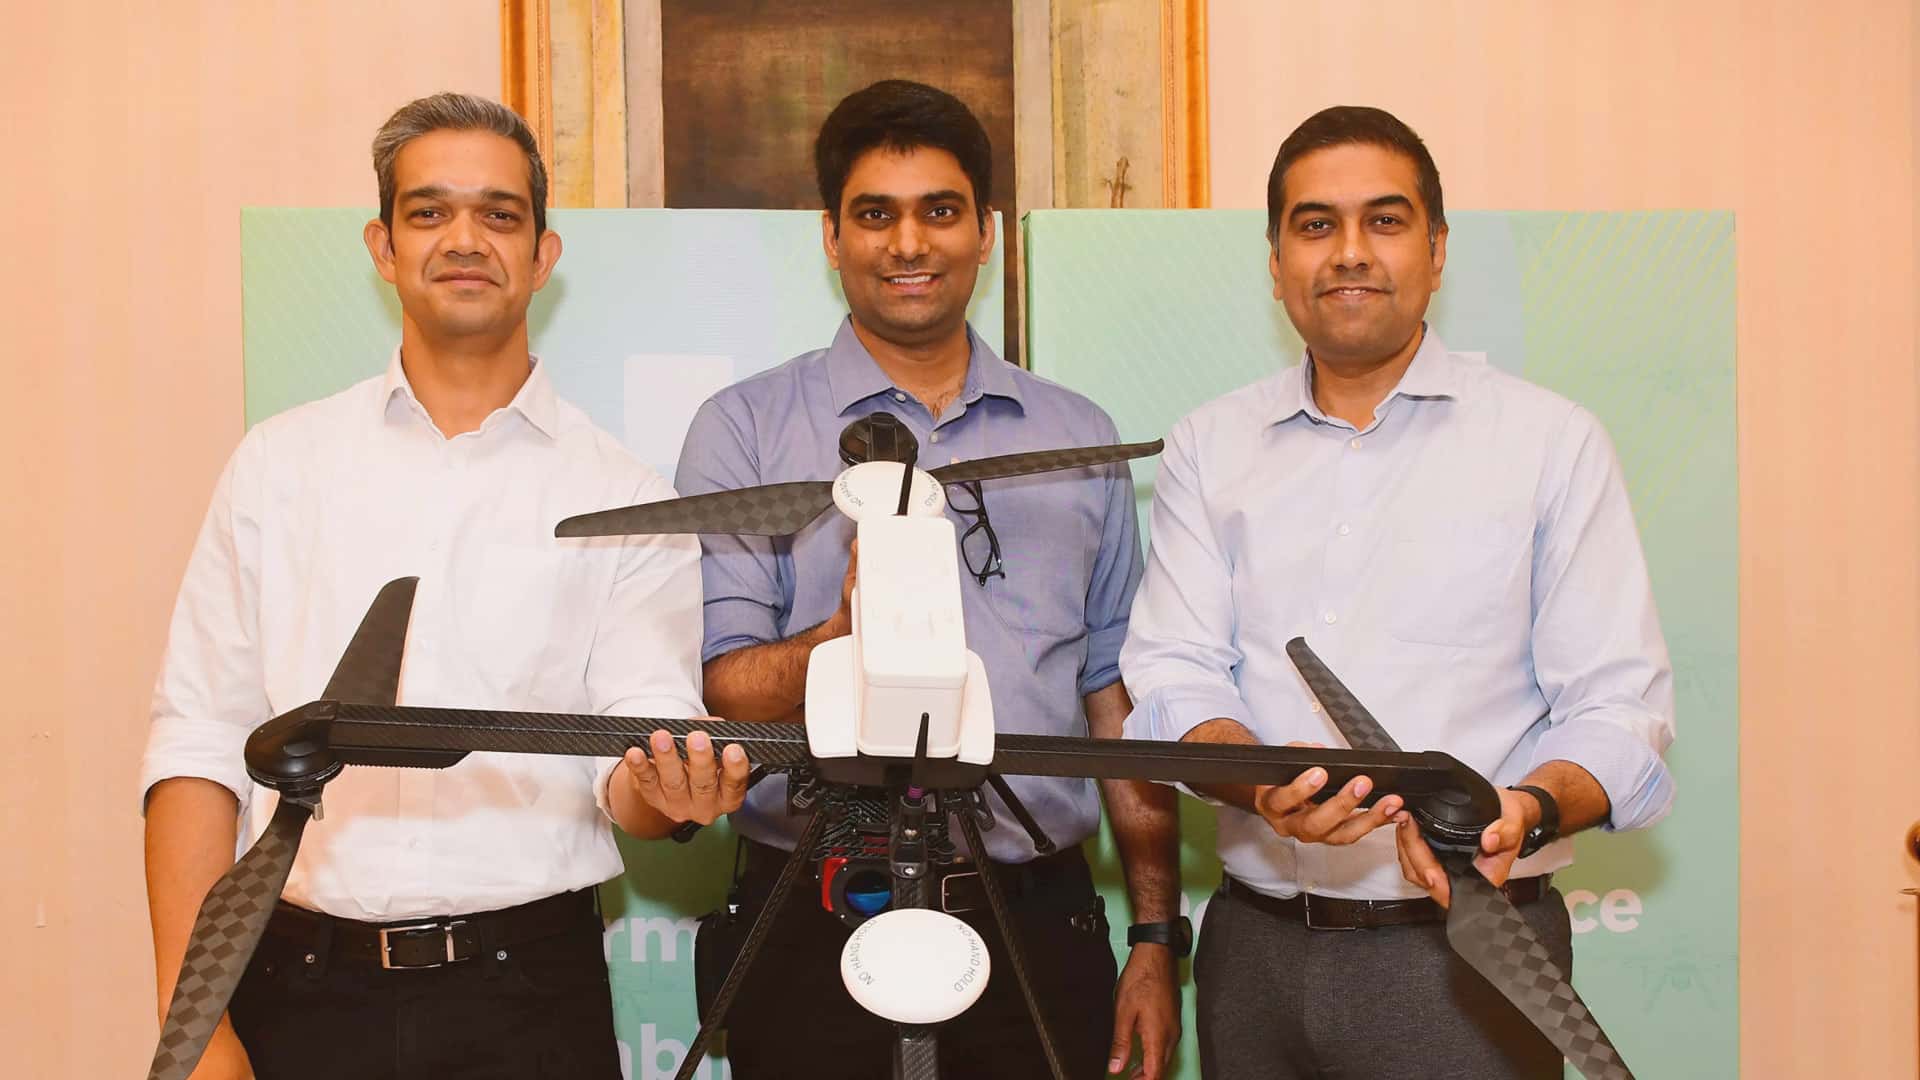 Ahead of IPO, Drone maker ideaForge raises Rs 255 cr from anchor investors